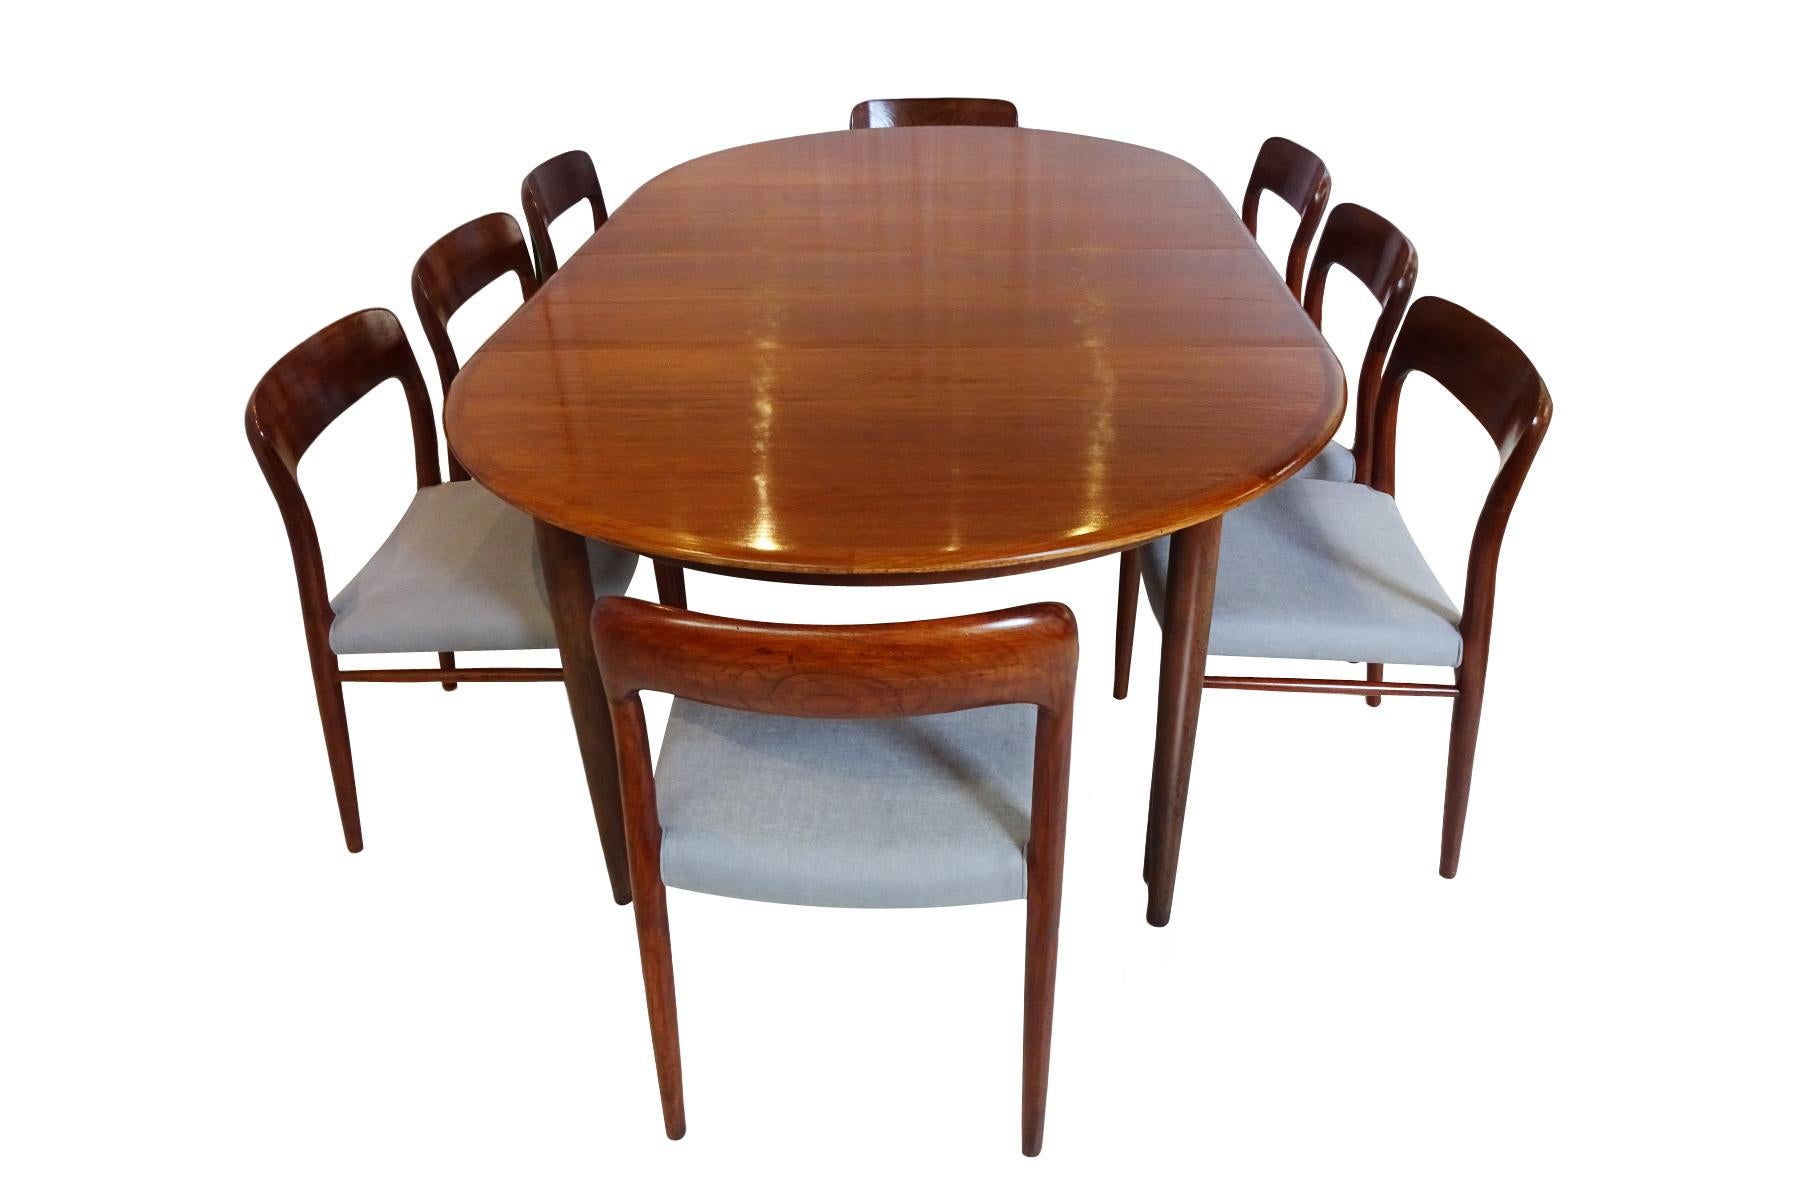 Mid-Century Modern Dining Set - Danish Midcentury Teak table and 8 chairs by Niels Otto Moller